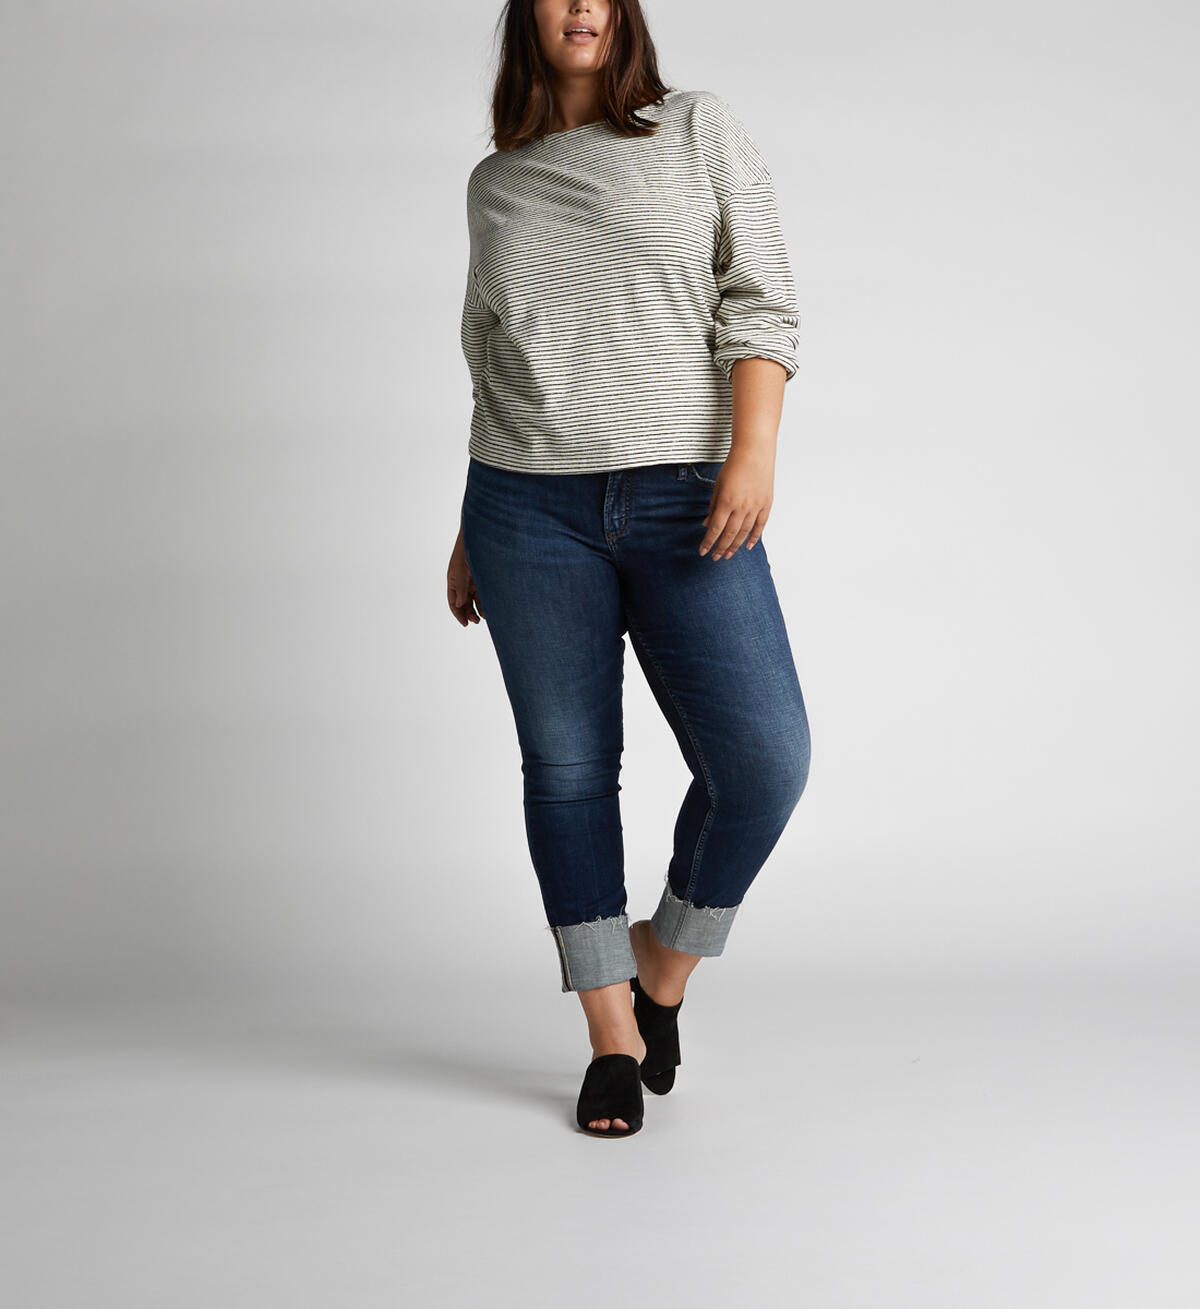 Elyse Mid-Rise Curvy Relaxed Slim-Leg Jeans, , hi-res image number 3